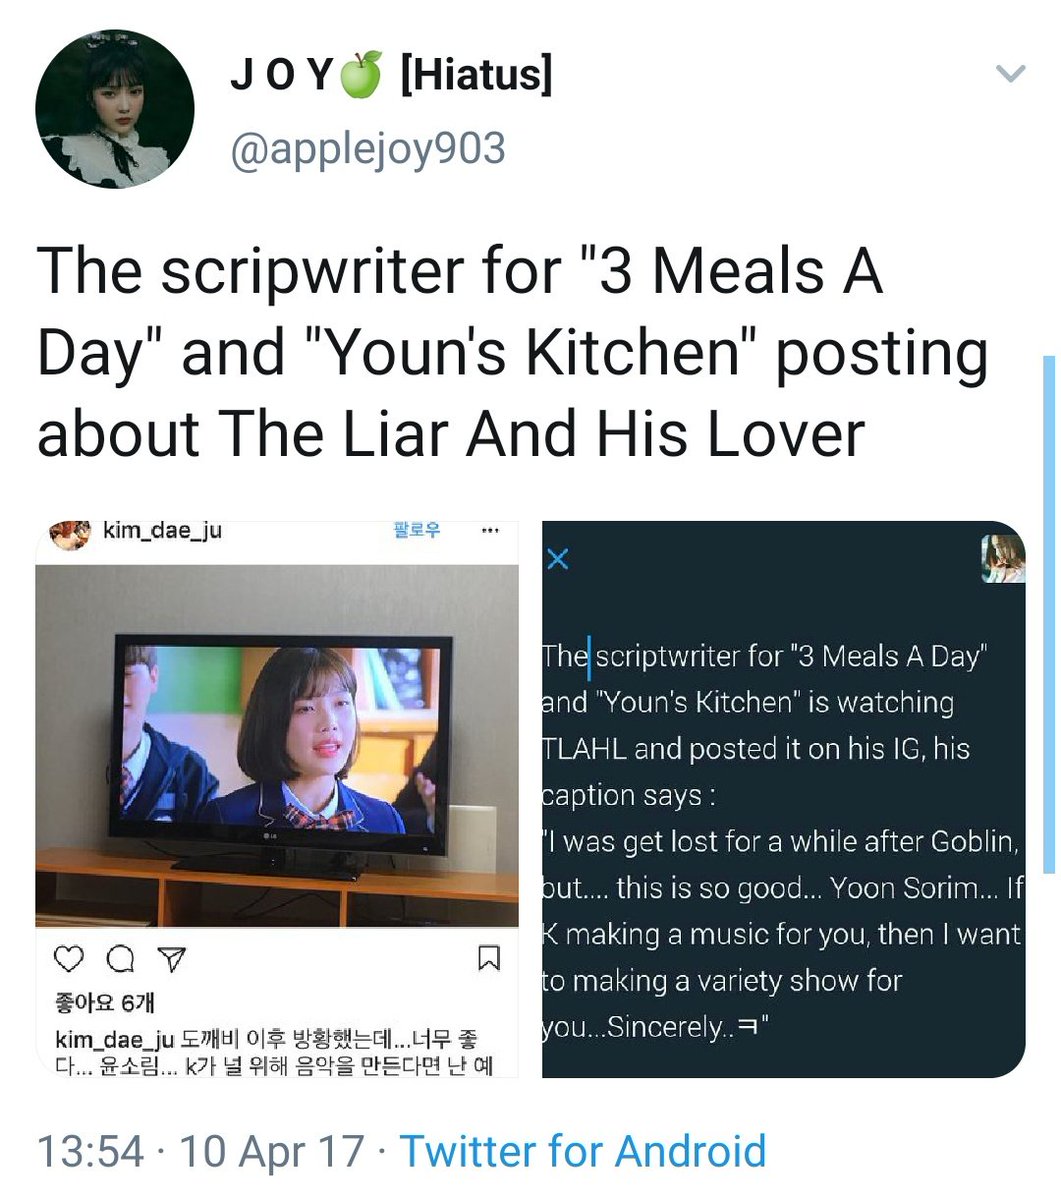 kim dae ju, the scriptwriter for k-shows (3 meals a day, youn's kitchen and korean hostel in spain) watched the liar and his lover and said that he wants to make a variety show for joy: